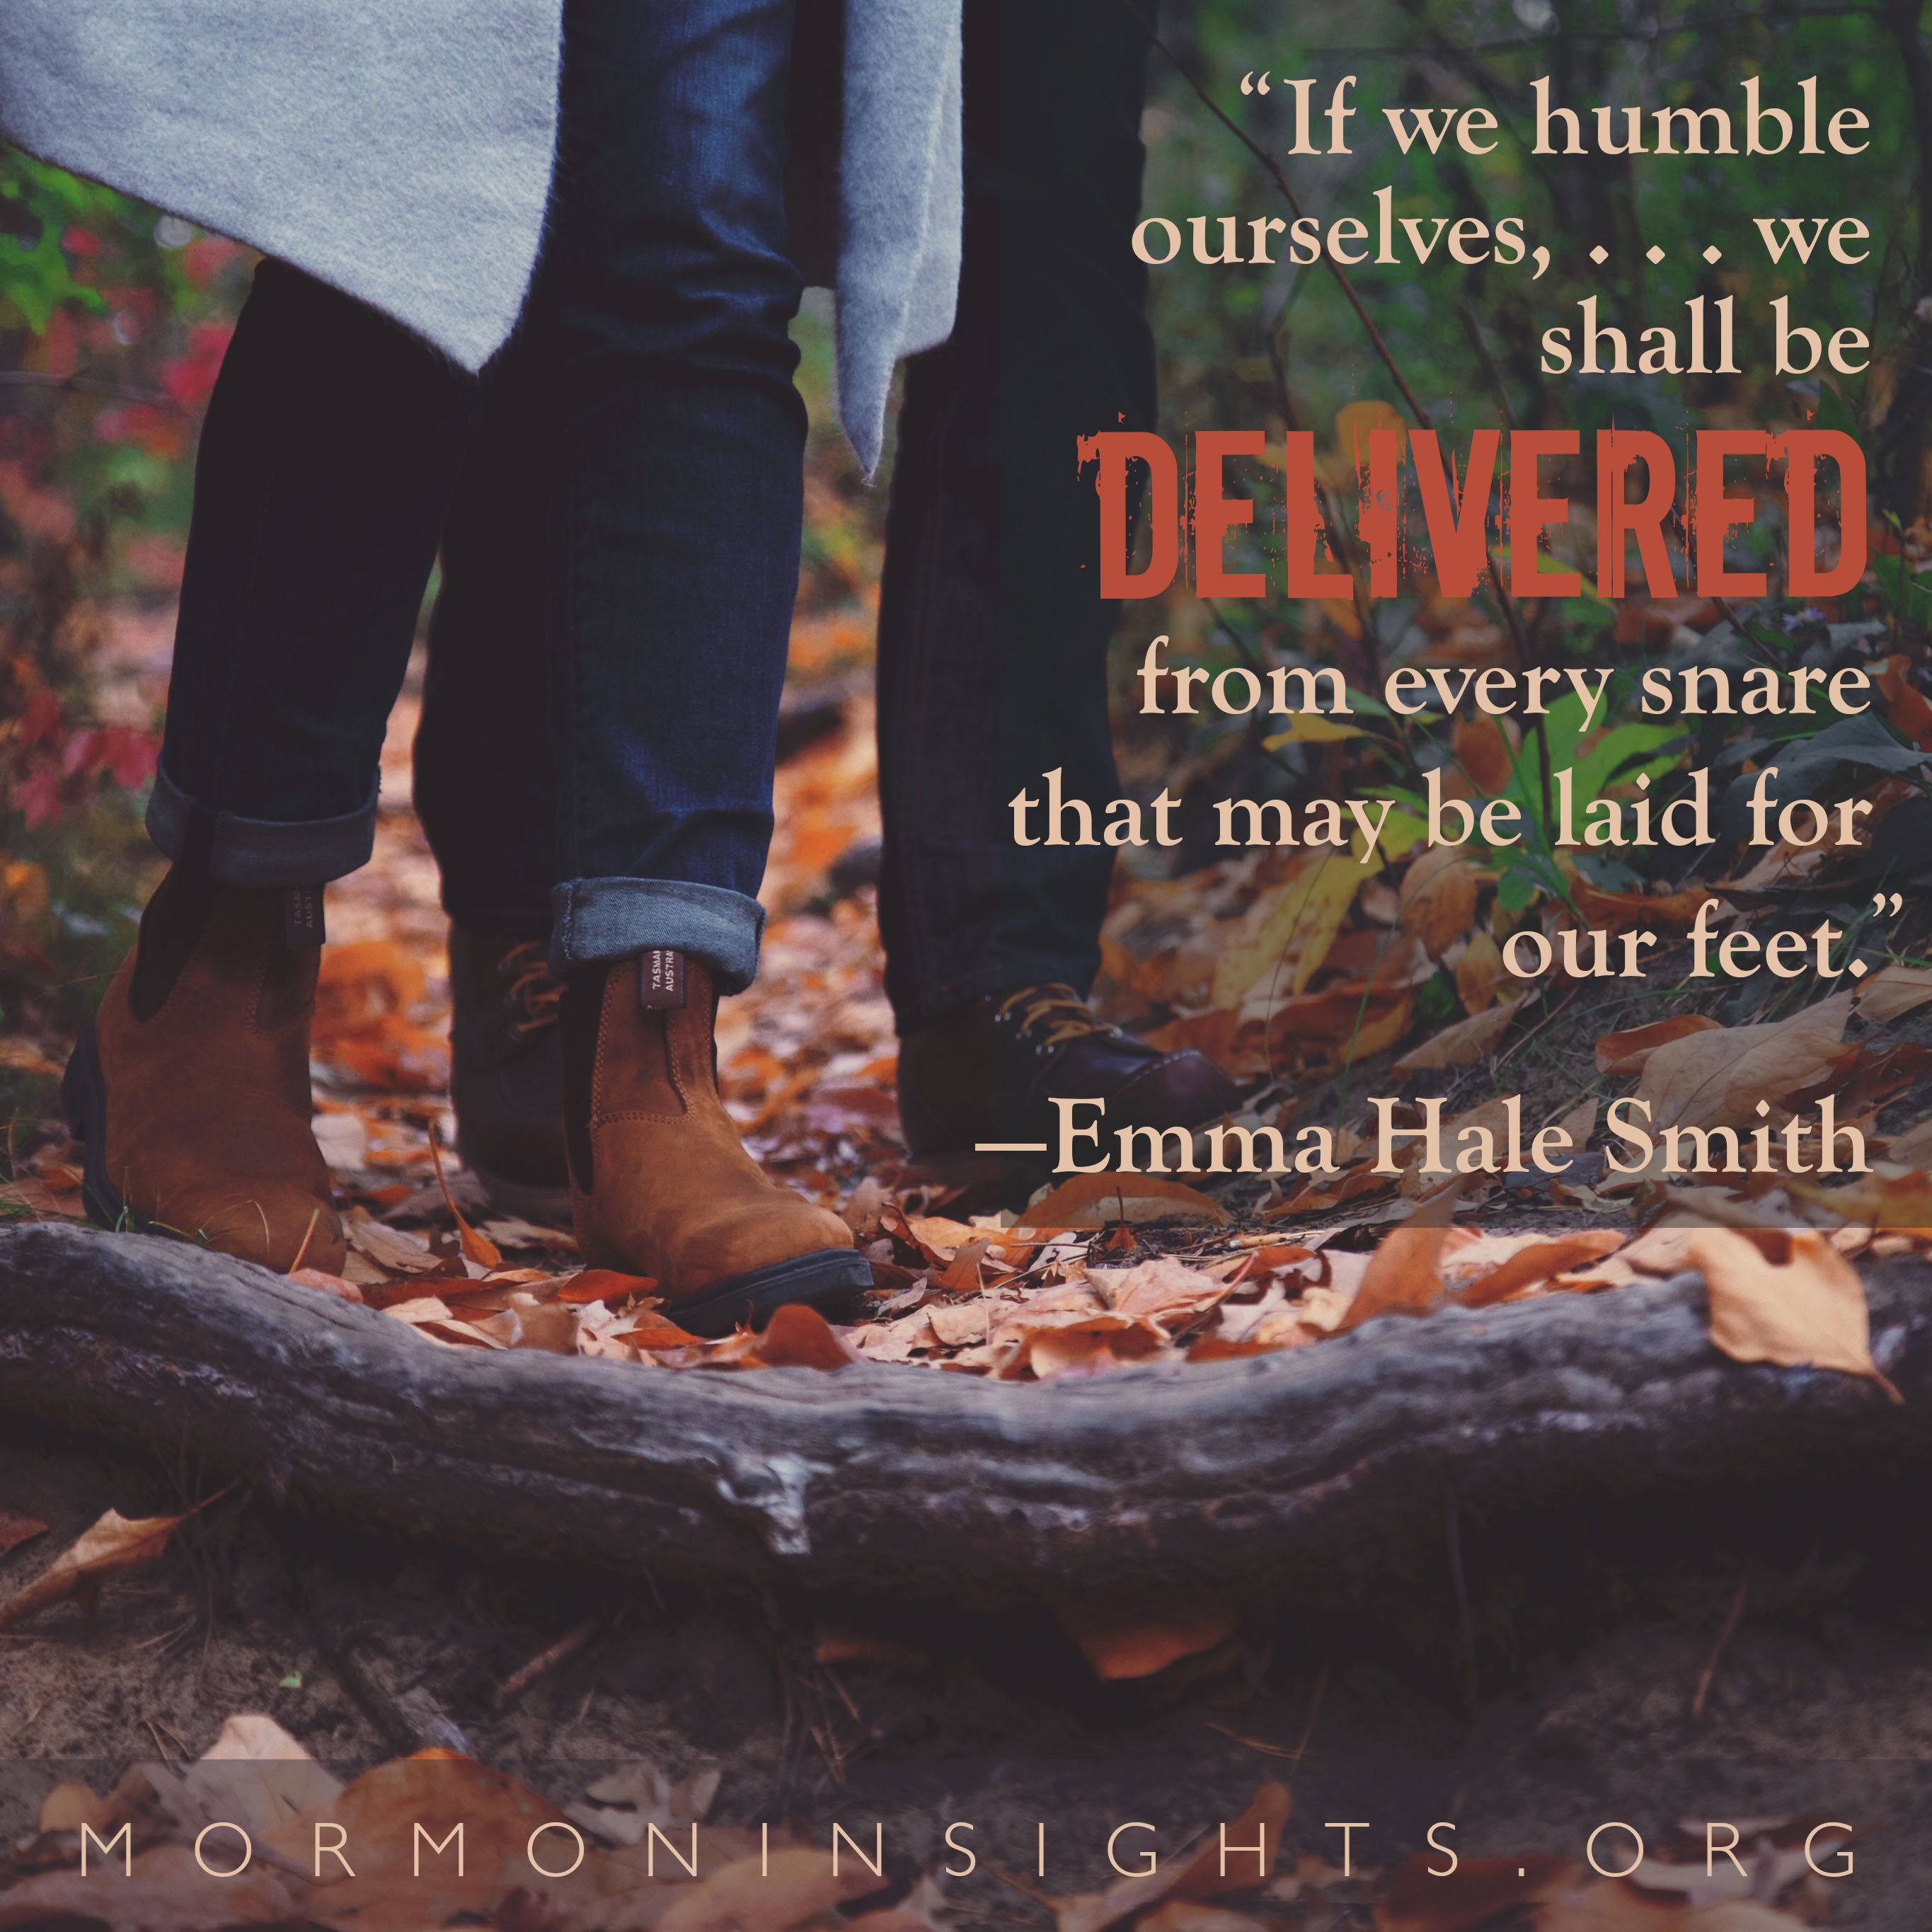 "If we humble ourselves, ...we shall be delivered from every snare that may be laid for our feet." -Emma Hale Smith